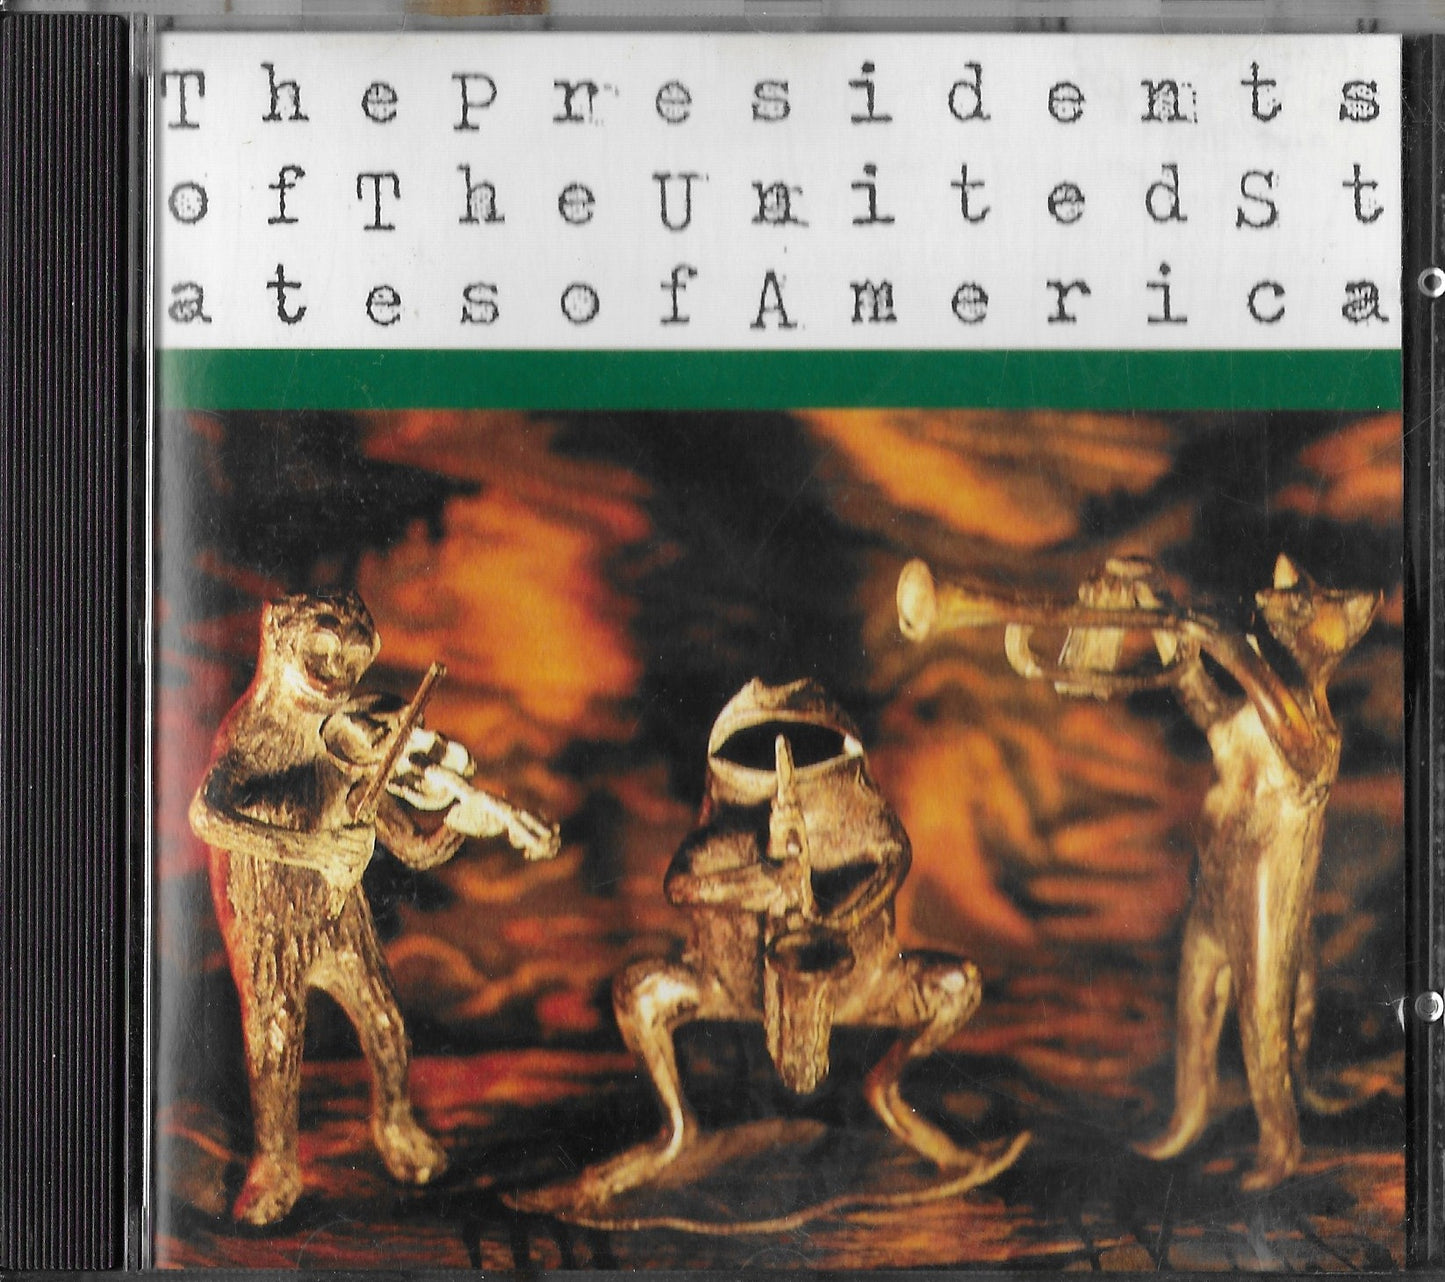 THE PRESIDENTS OF THE UNITED STATES OF AMERICA - The Presidents Of The United States Of America